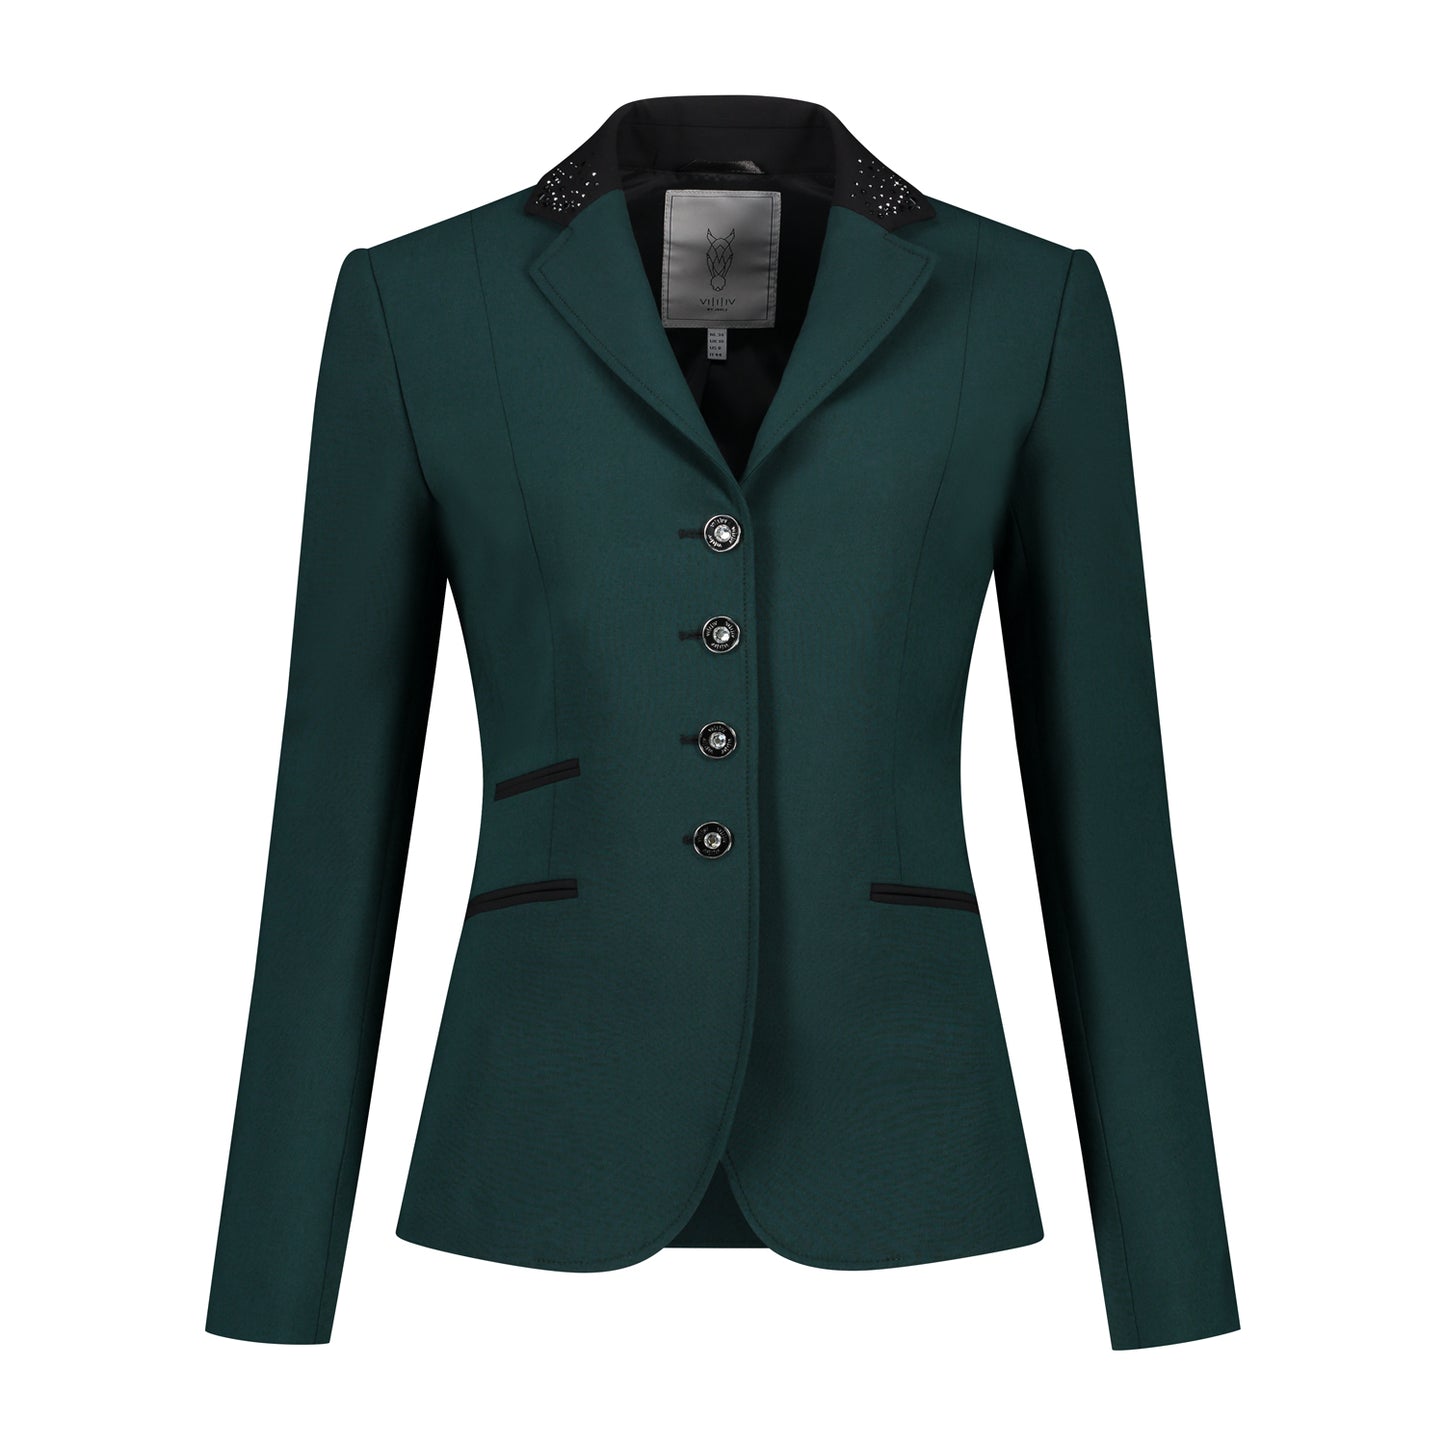 Competition jacket - Emerald